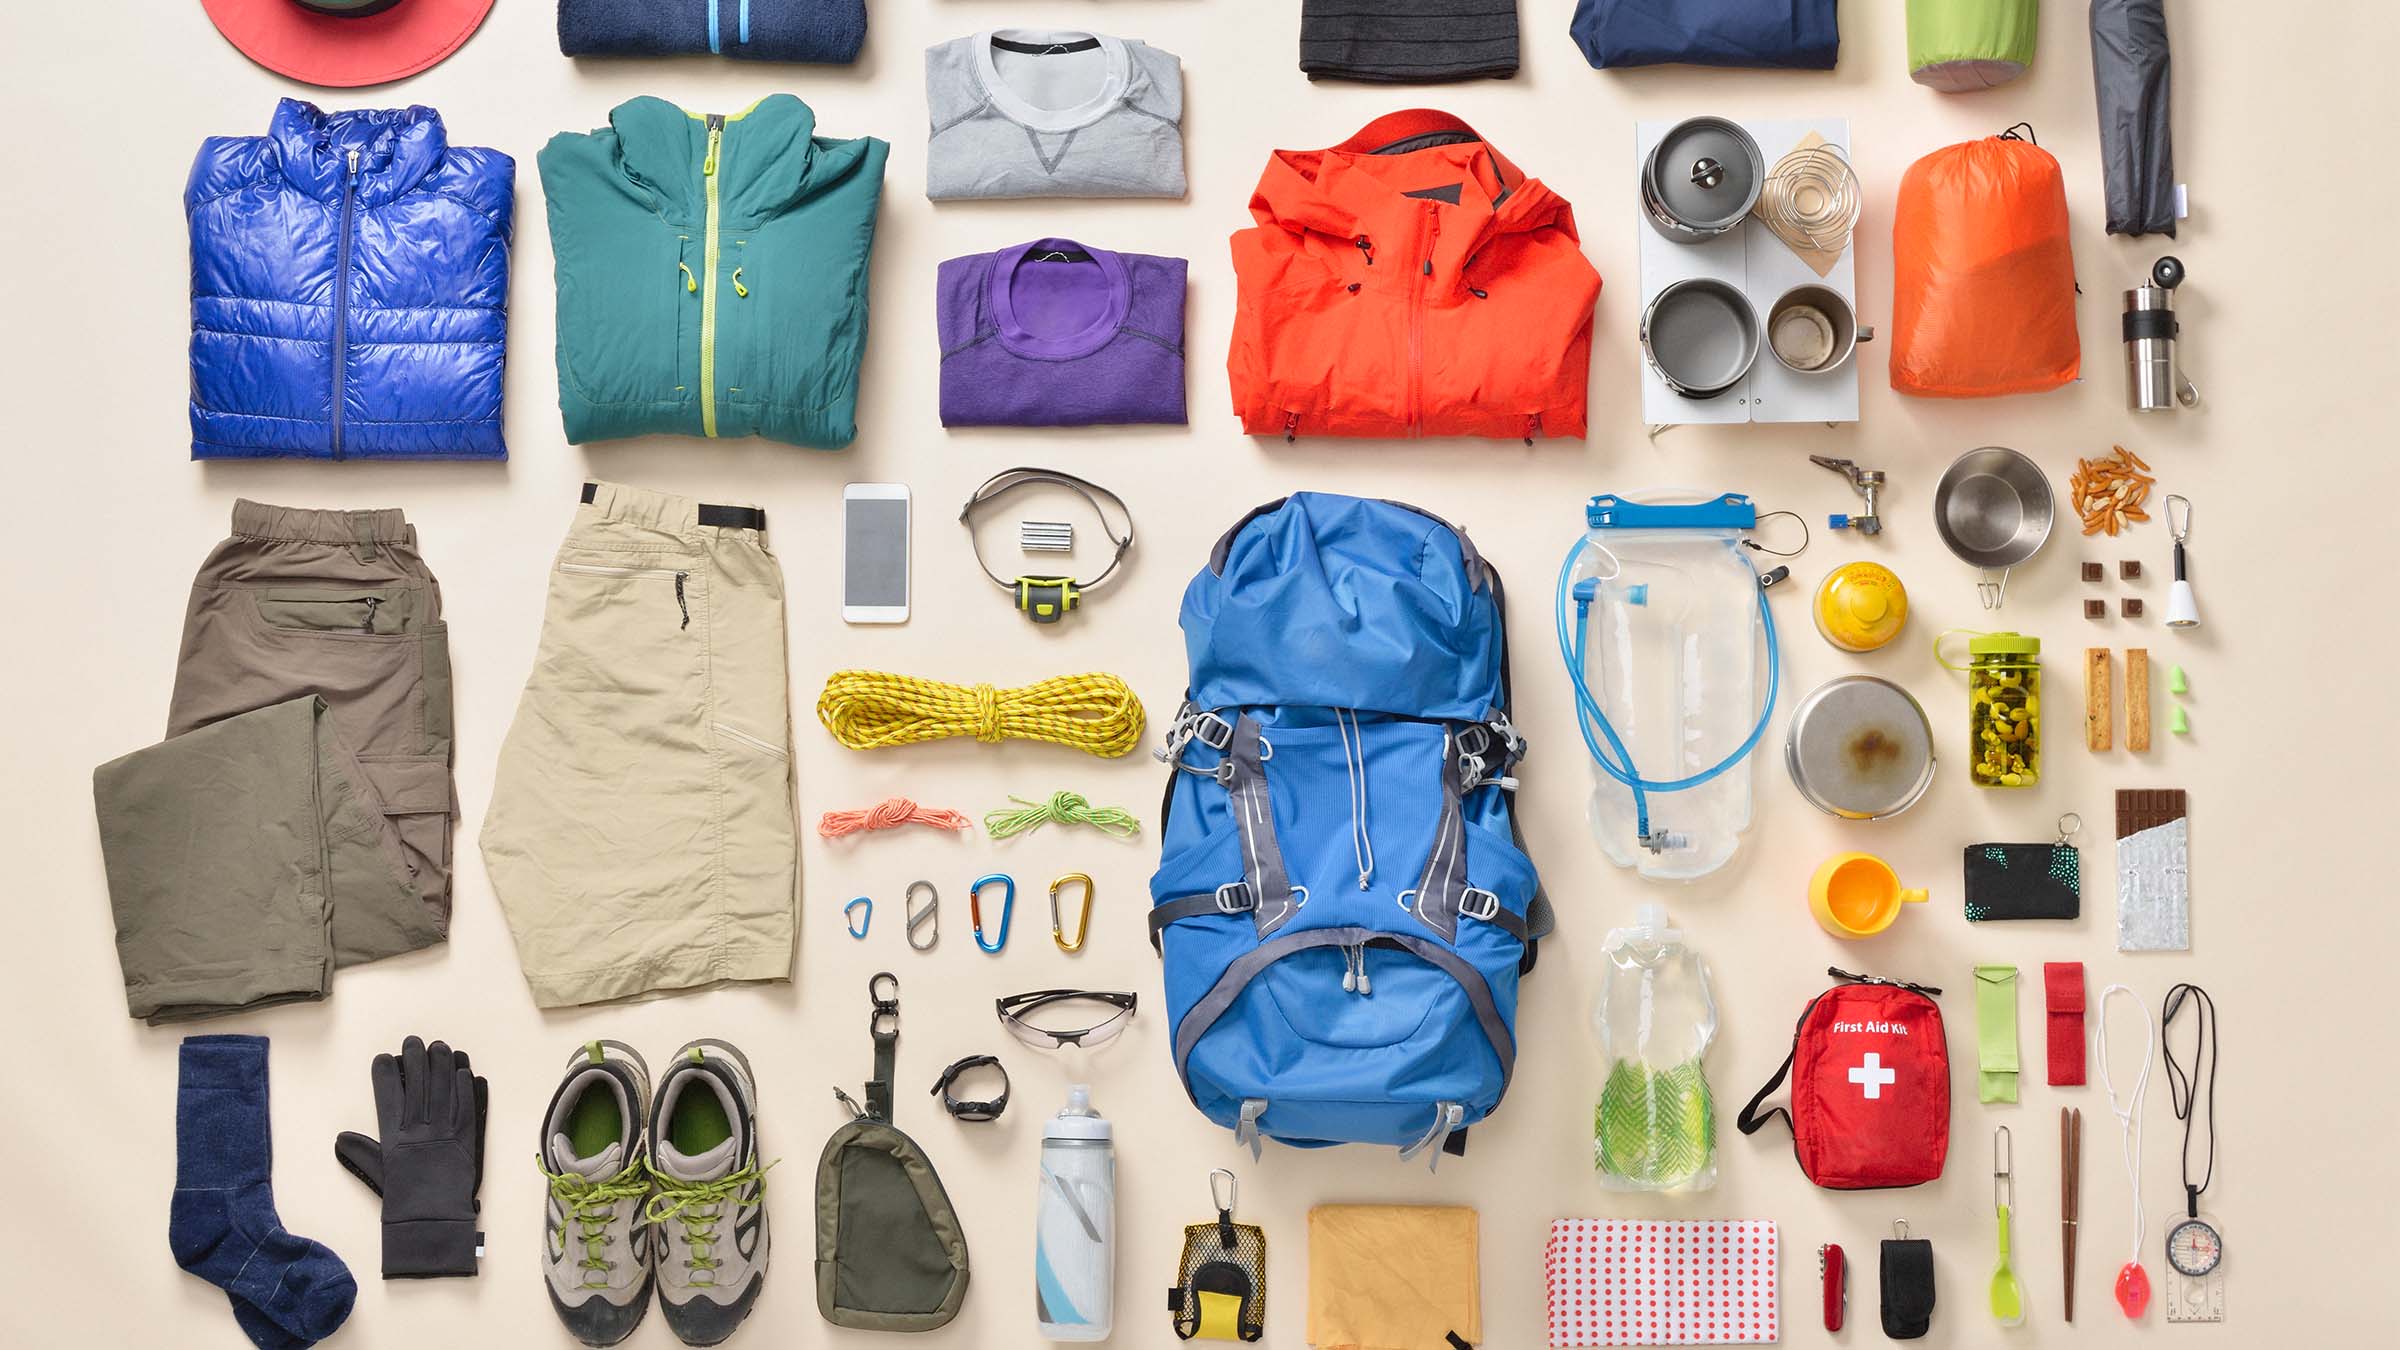 Stand Out While You Get Out: A Hiking Clothing Color Guide